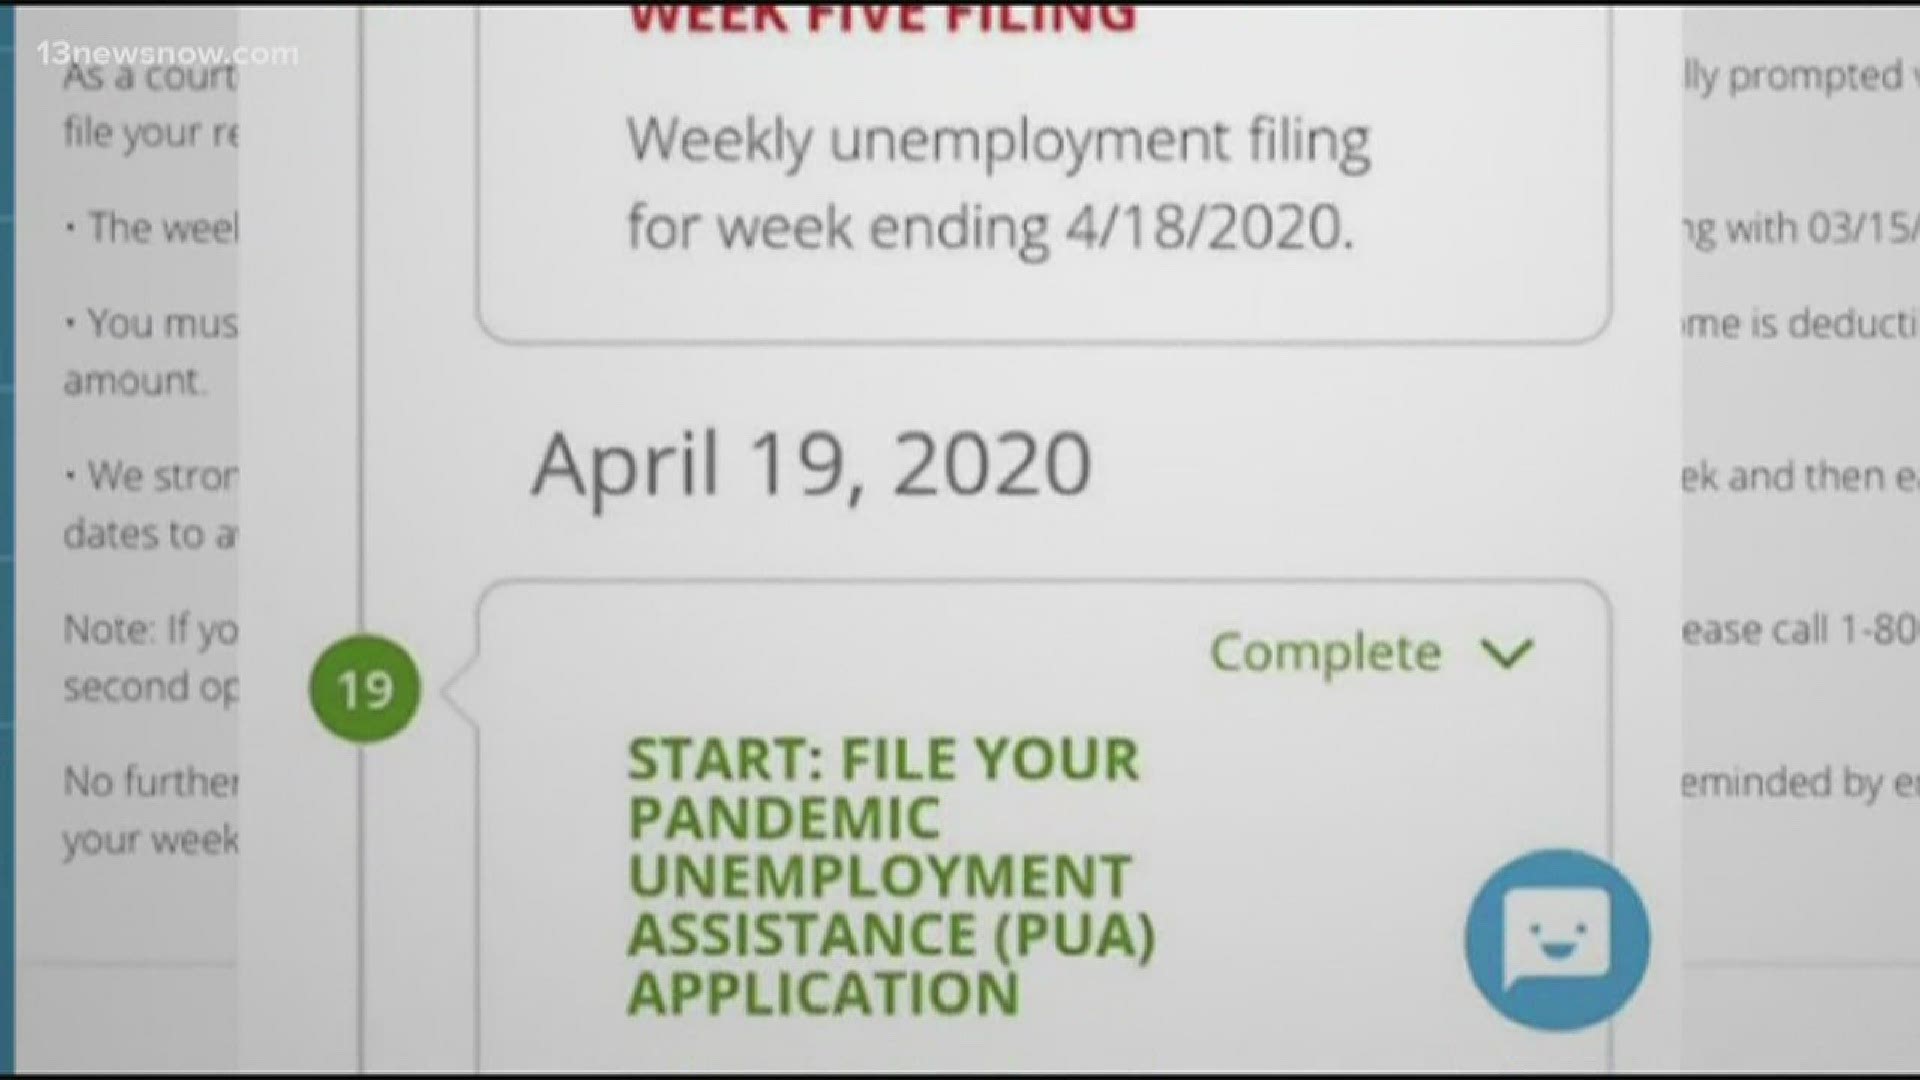 More than 33 million Americans have now filed for unemployment benefits since mid-March.